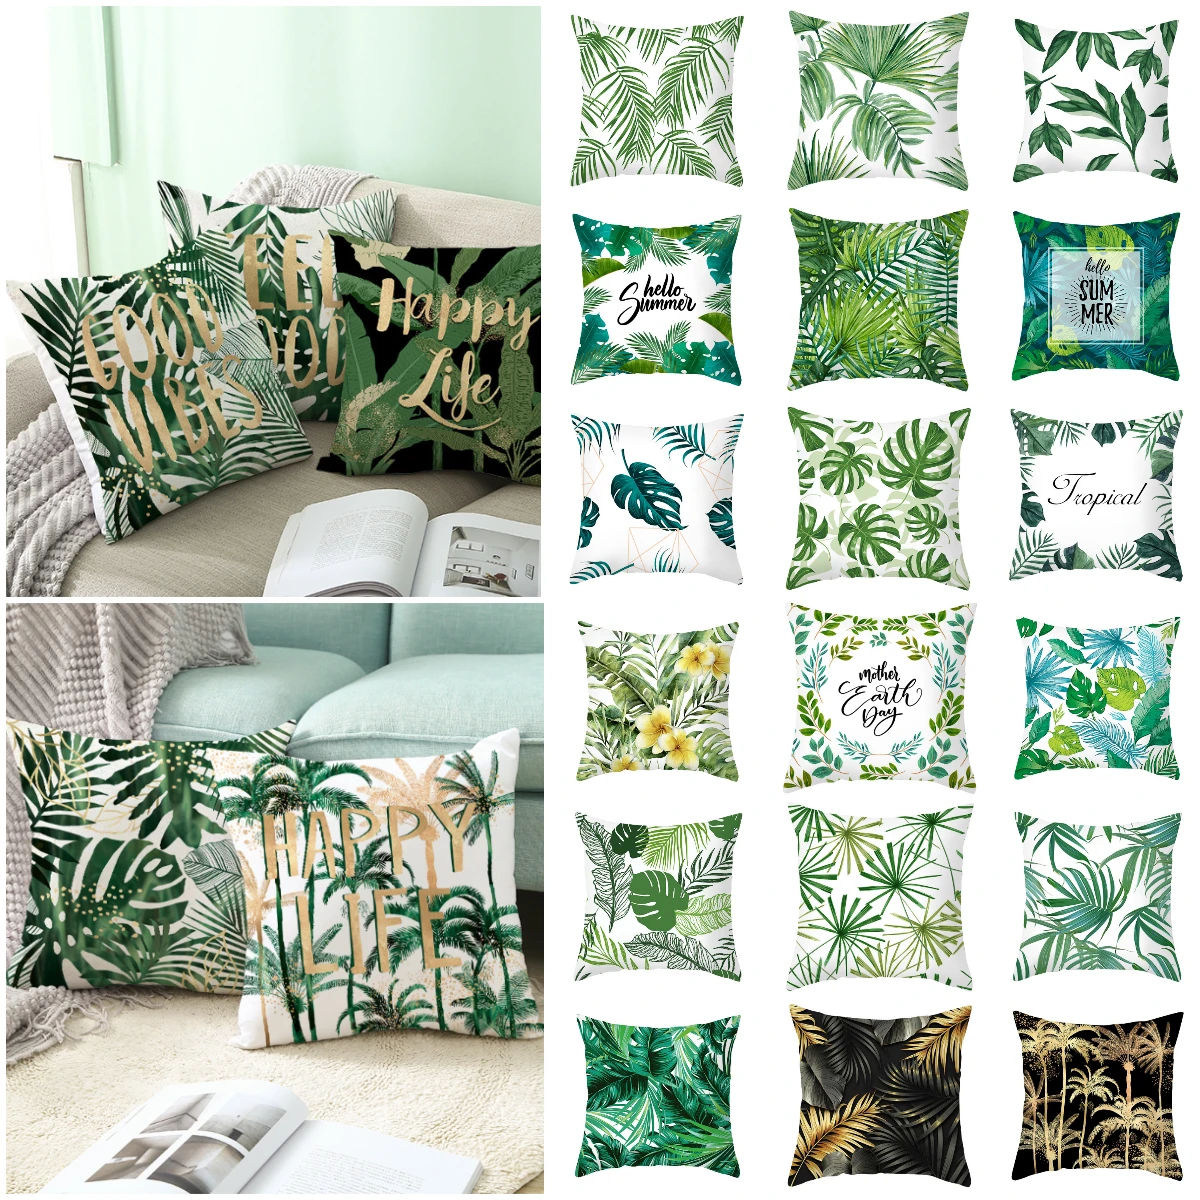 

2020 Hot Sale Tropical Plants Leaves Cushion Cover Simple Botanical Art Palm Monstera Pillowcase Modern Couch Decorative Pillows